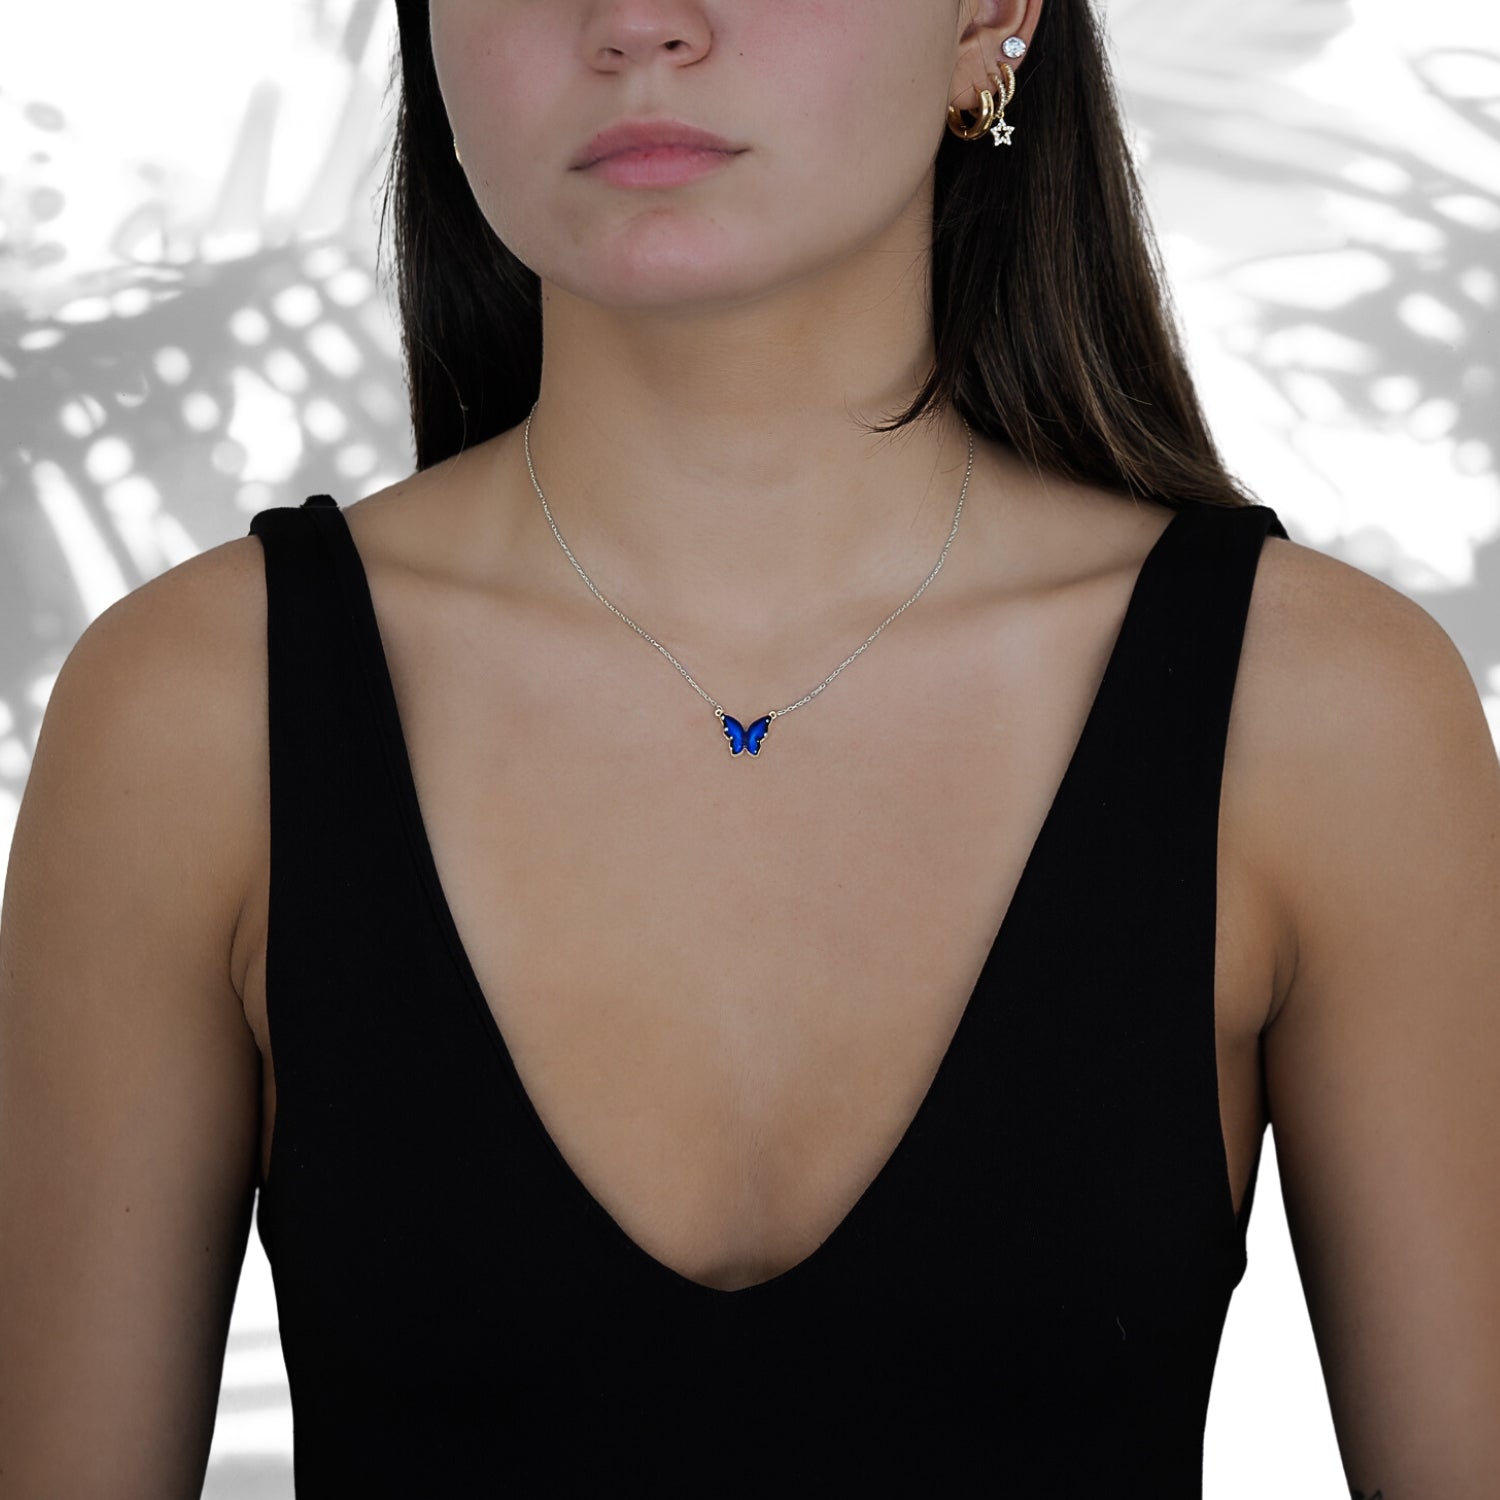 Stylish shot of a model wearing the Silver Spiritual Blue Enamel Butterfly Necklace, showcasing its spiritual and aesthetic appeal.